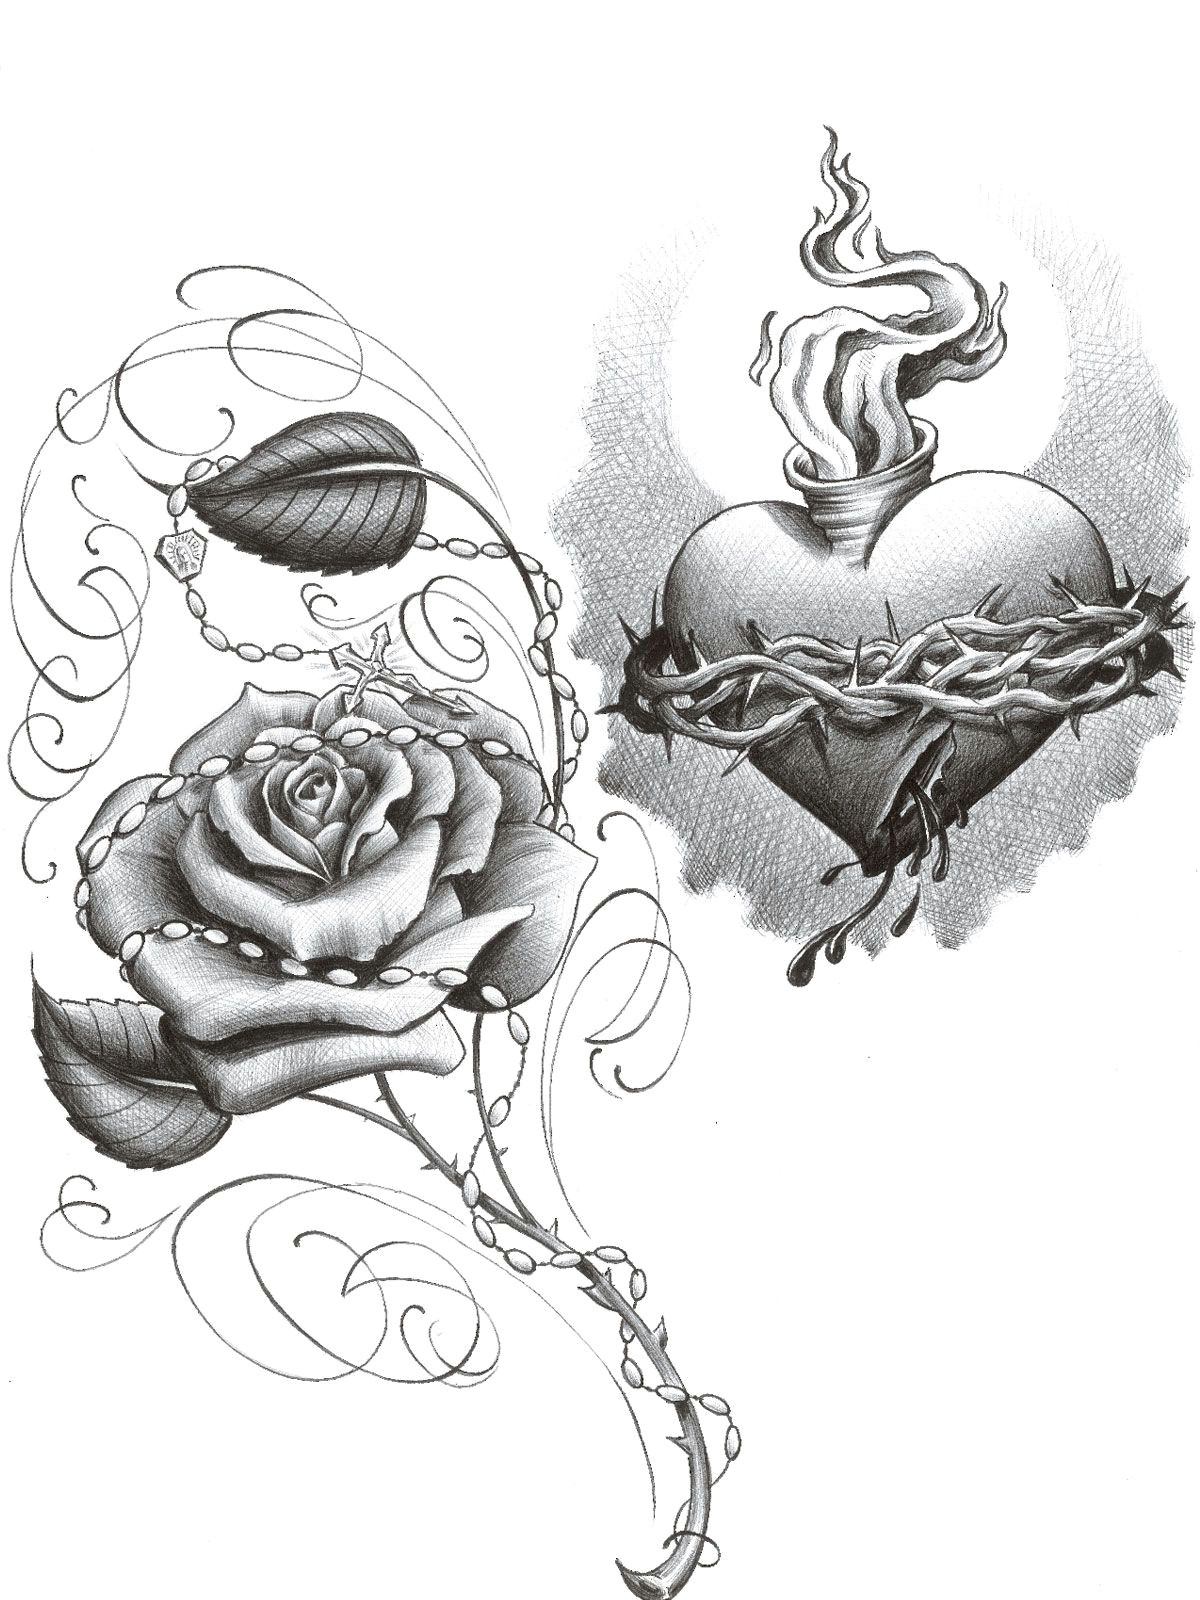 Drawing Of A Rose Simple Chicano Art Drawings Roses Chicano Rose Thugs Chica Tat by 2face